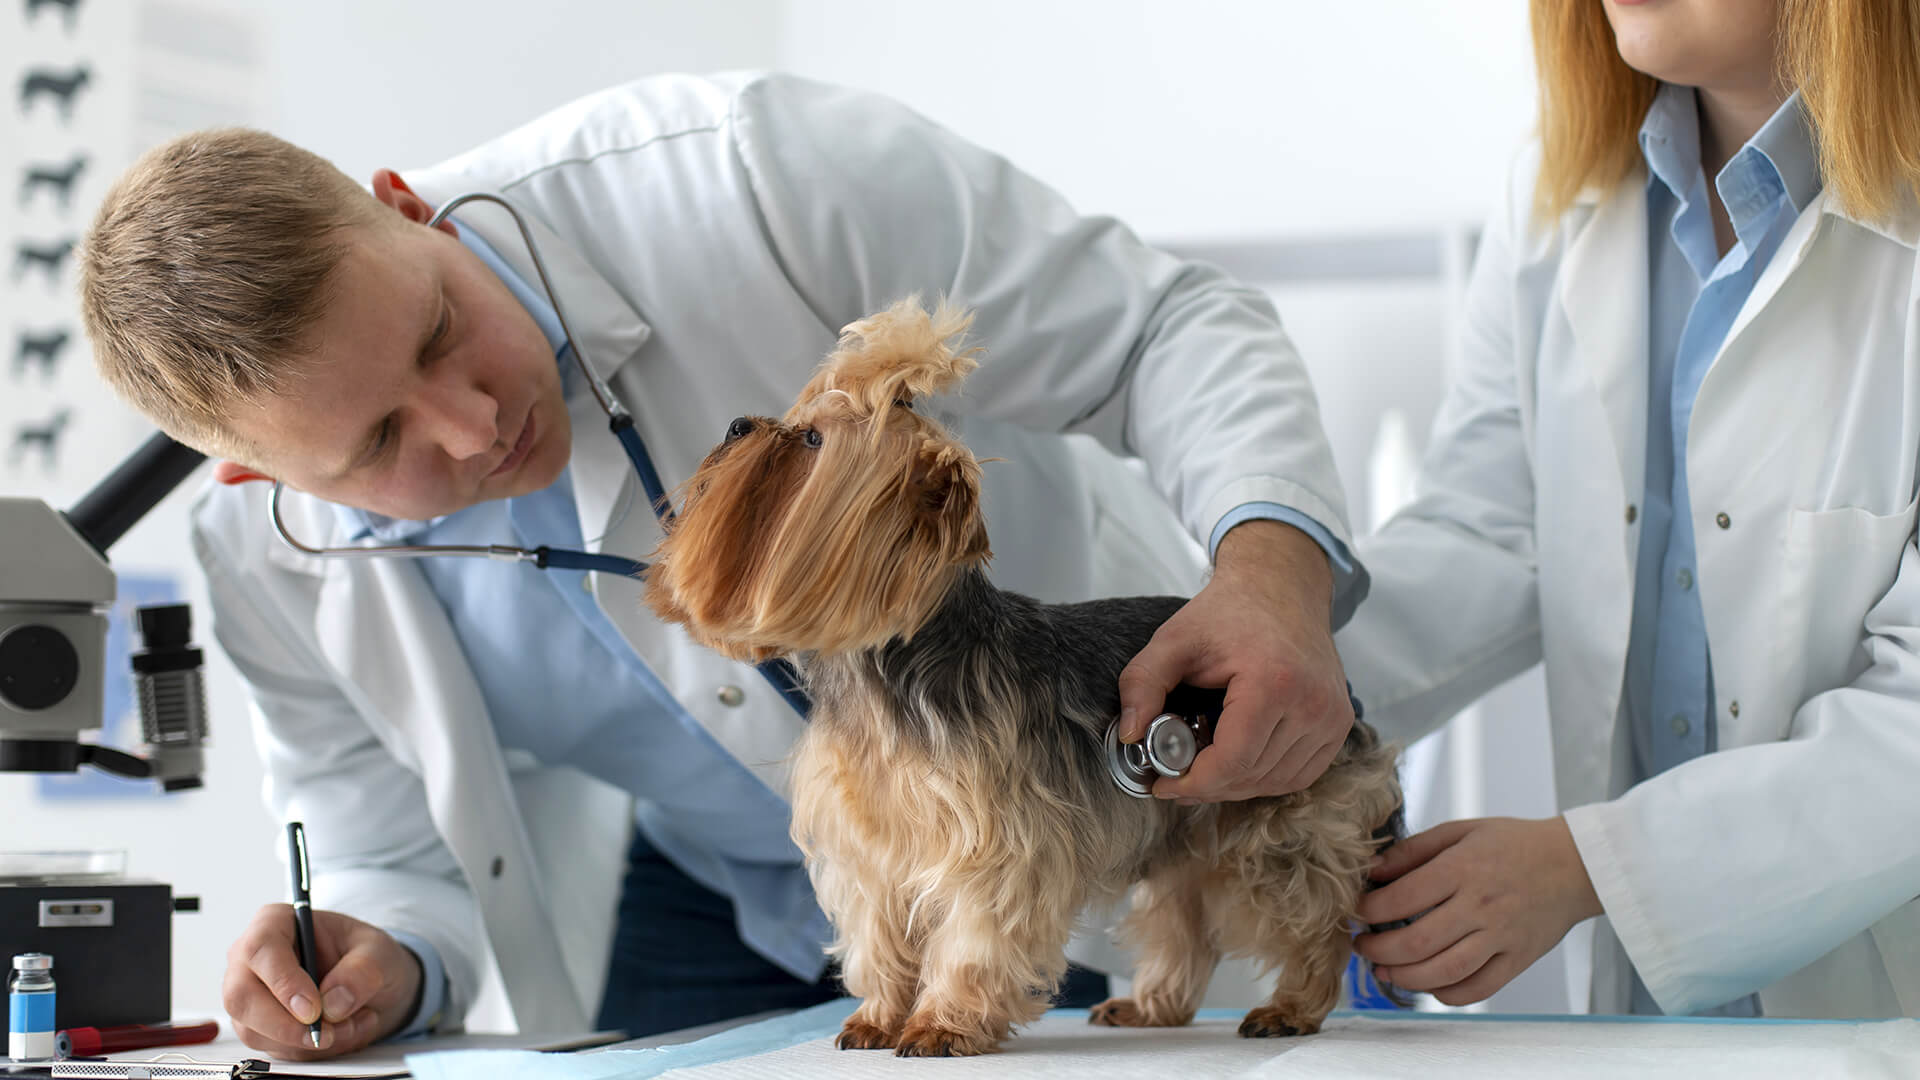 Two veterinarians are examining the dog.